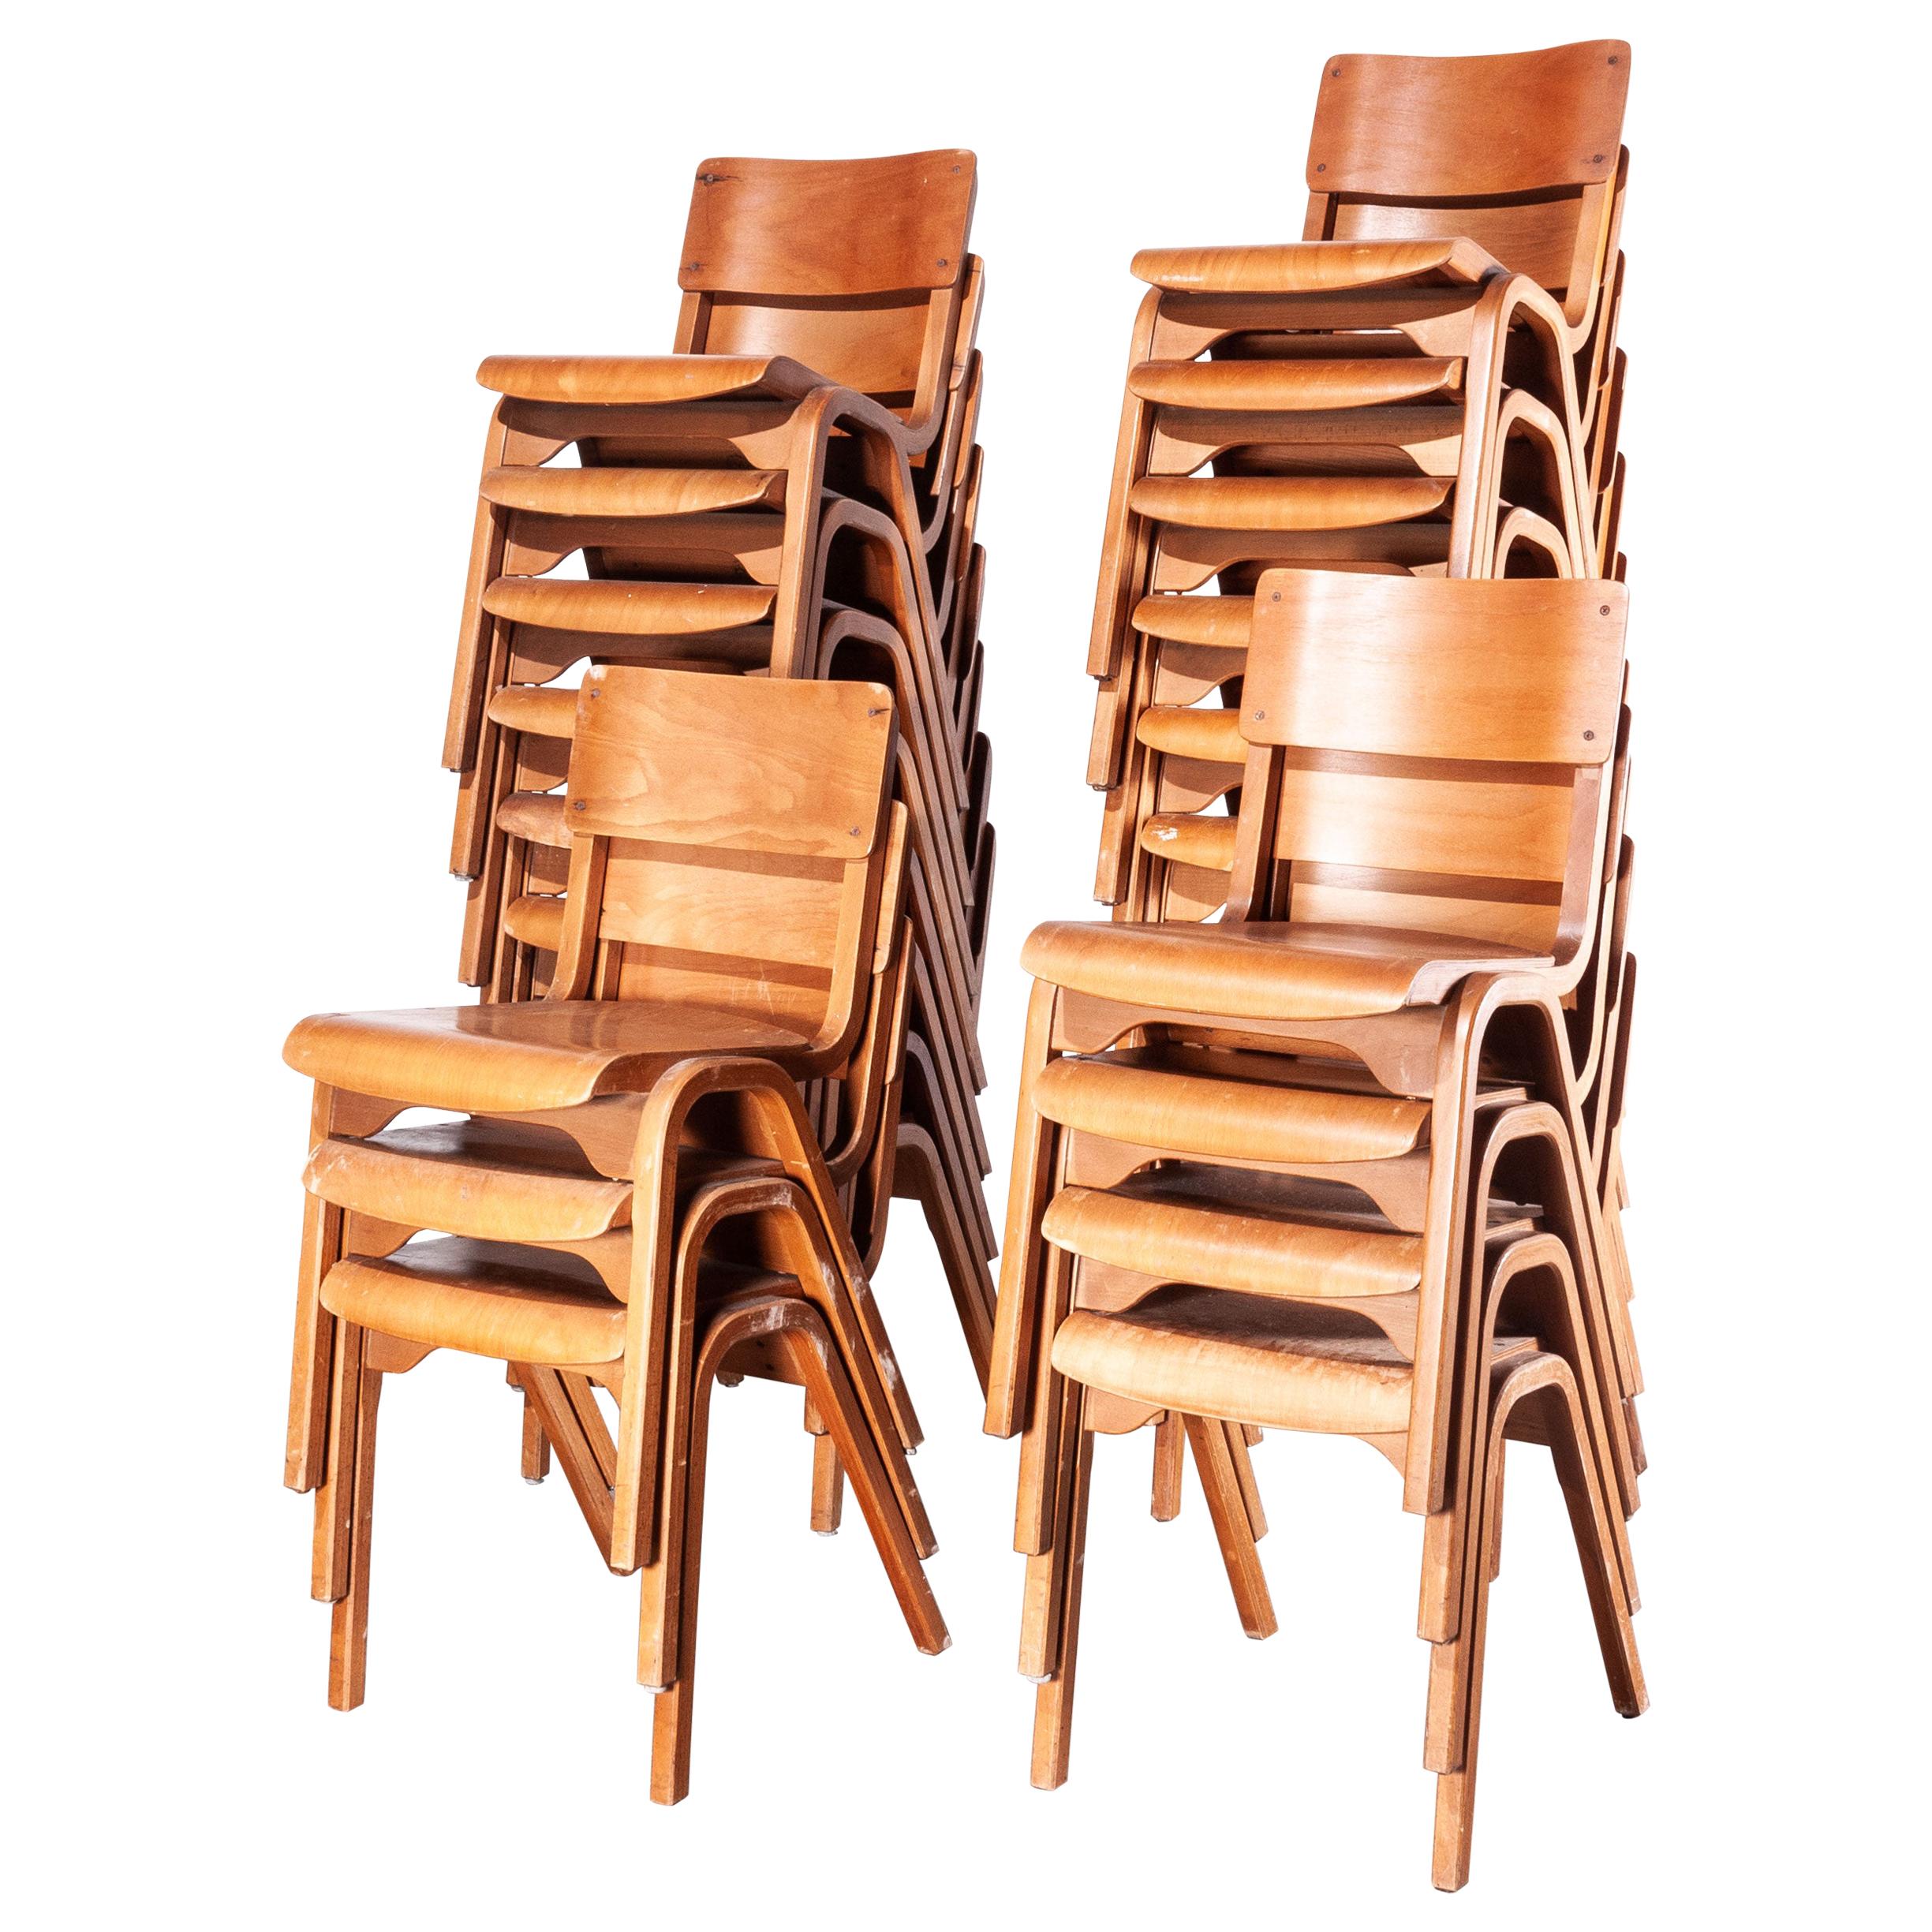 1950s Stacking Dining Chairs by ESA James Leonard, Lamstak, Set of Twenty Four